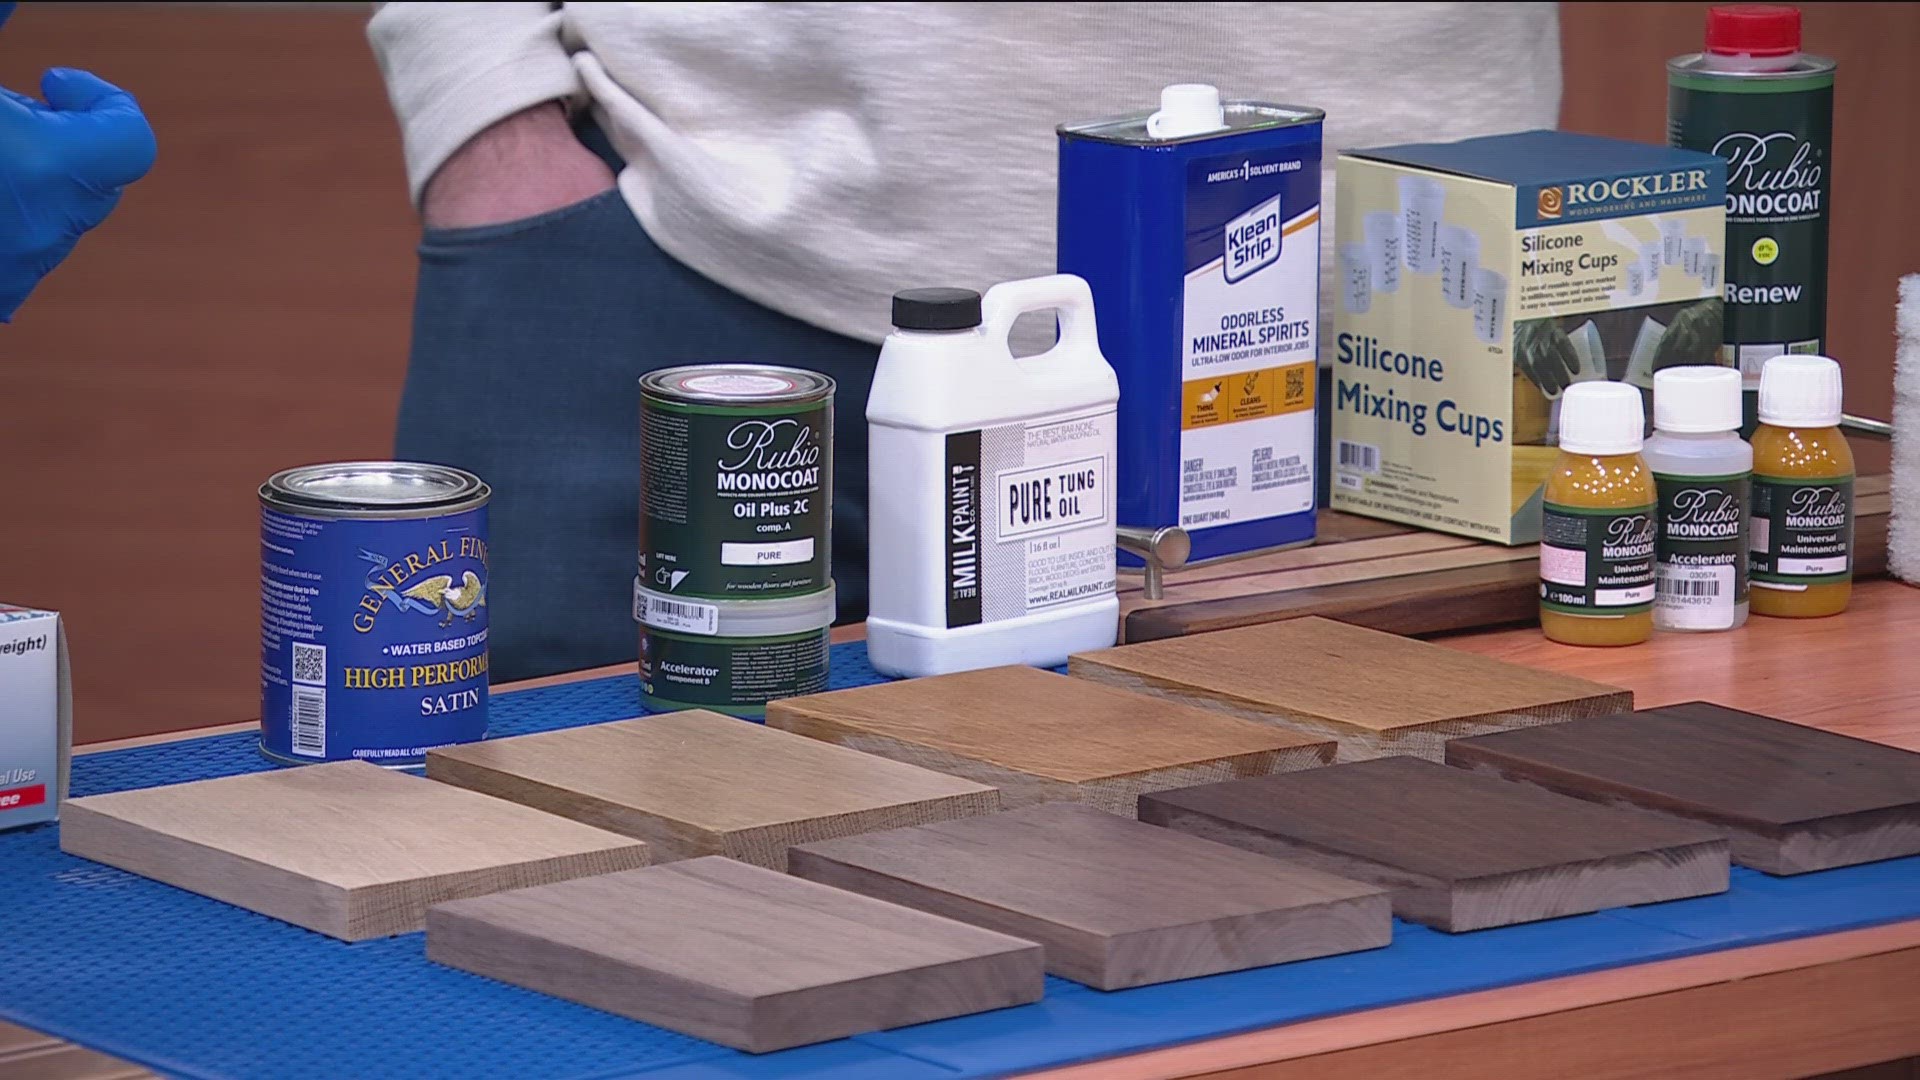 Rockler Woodworking and Hardware is hosting a series of hands-on woodworking classes for all skill levels.